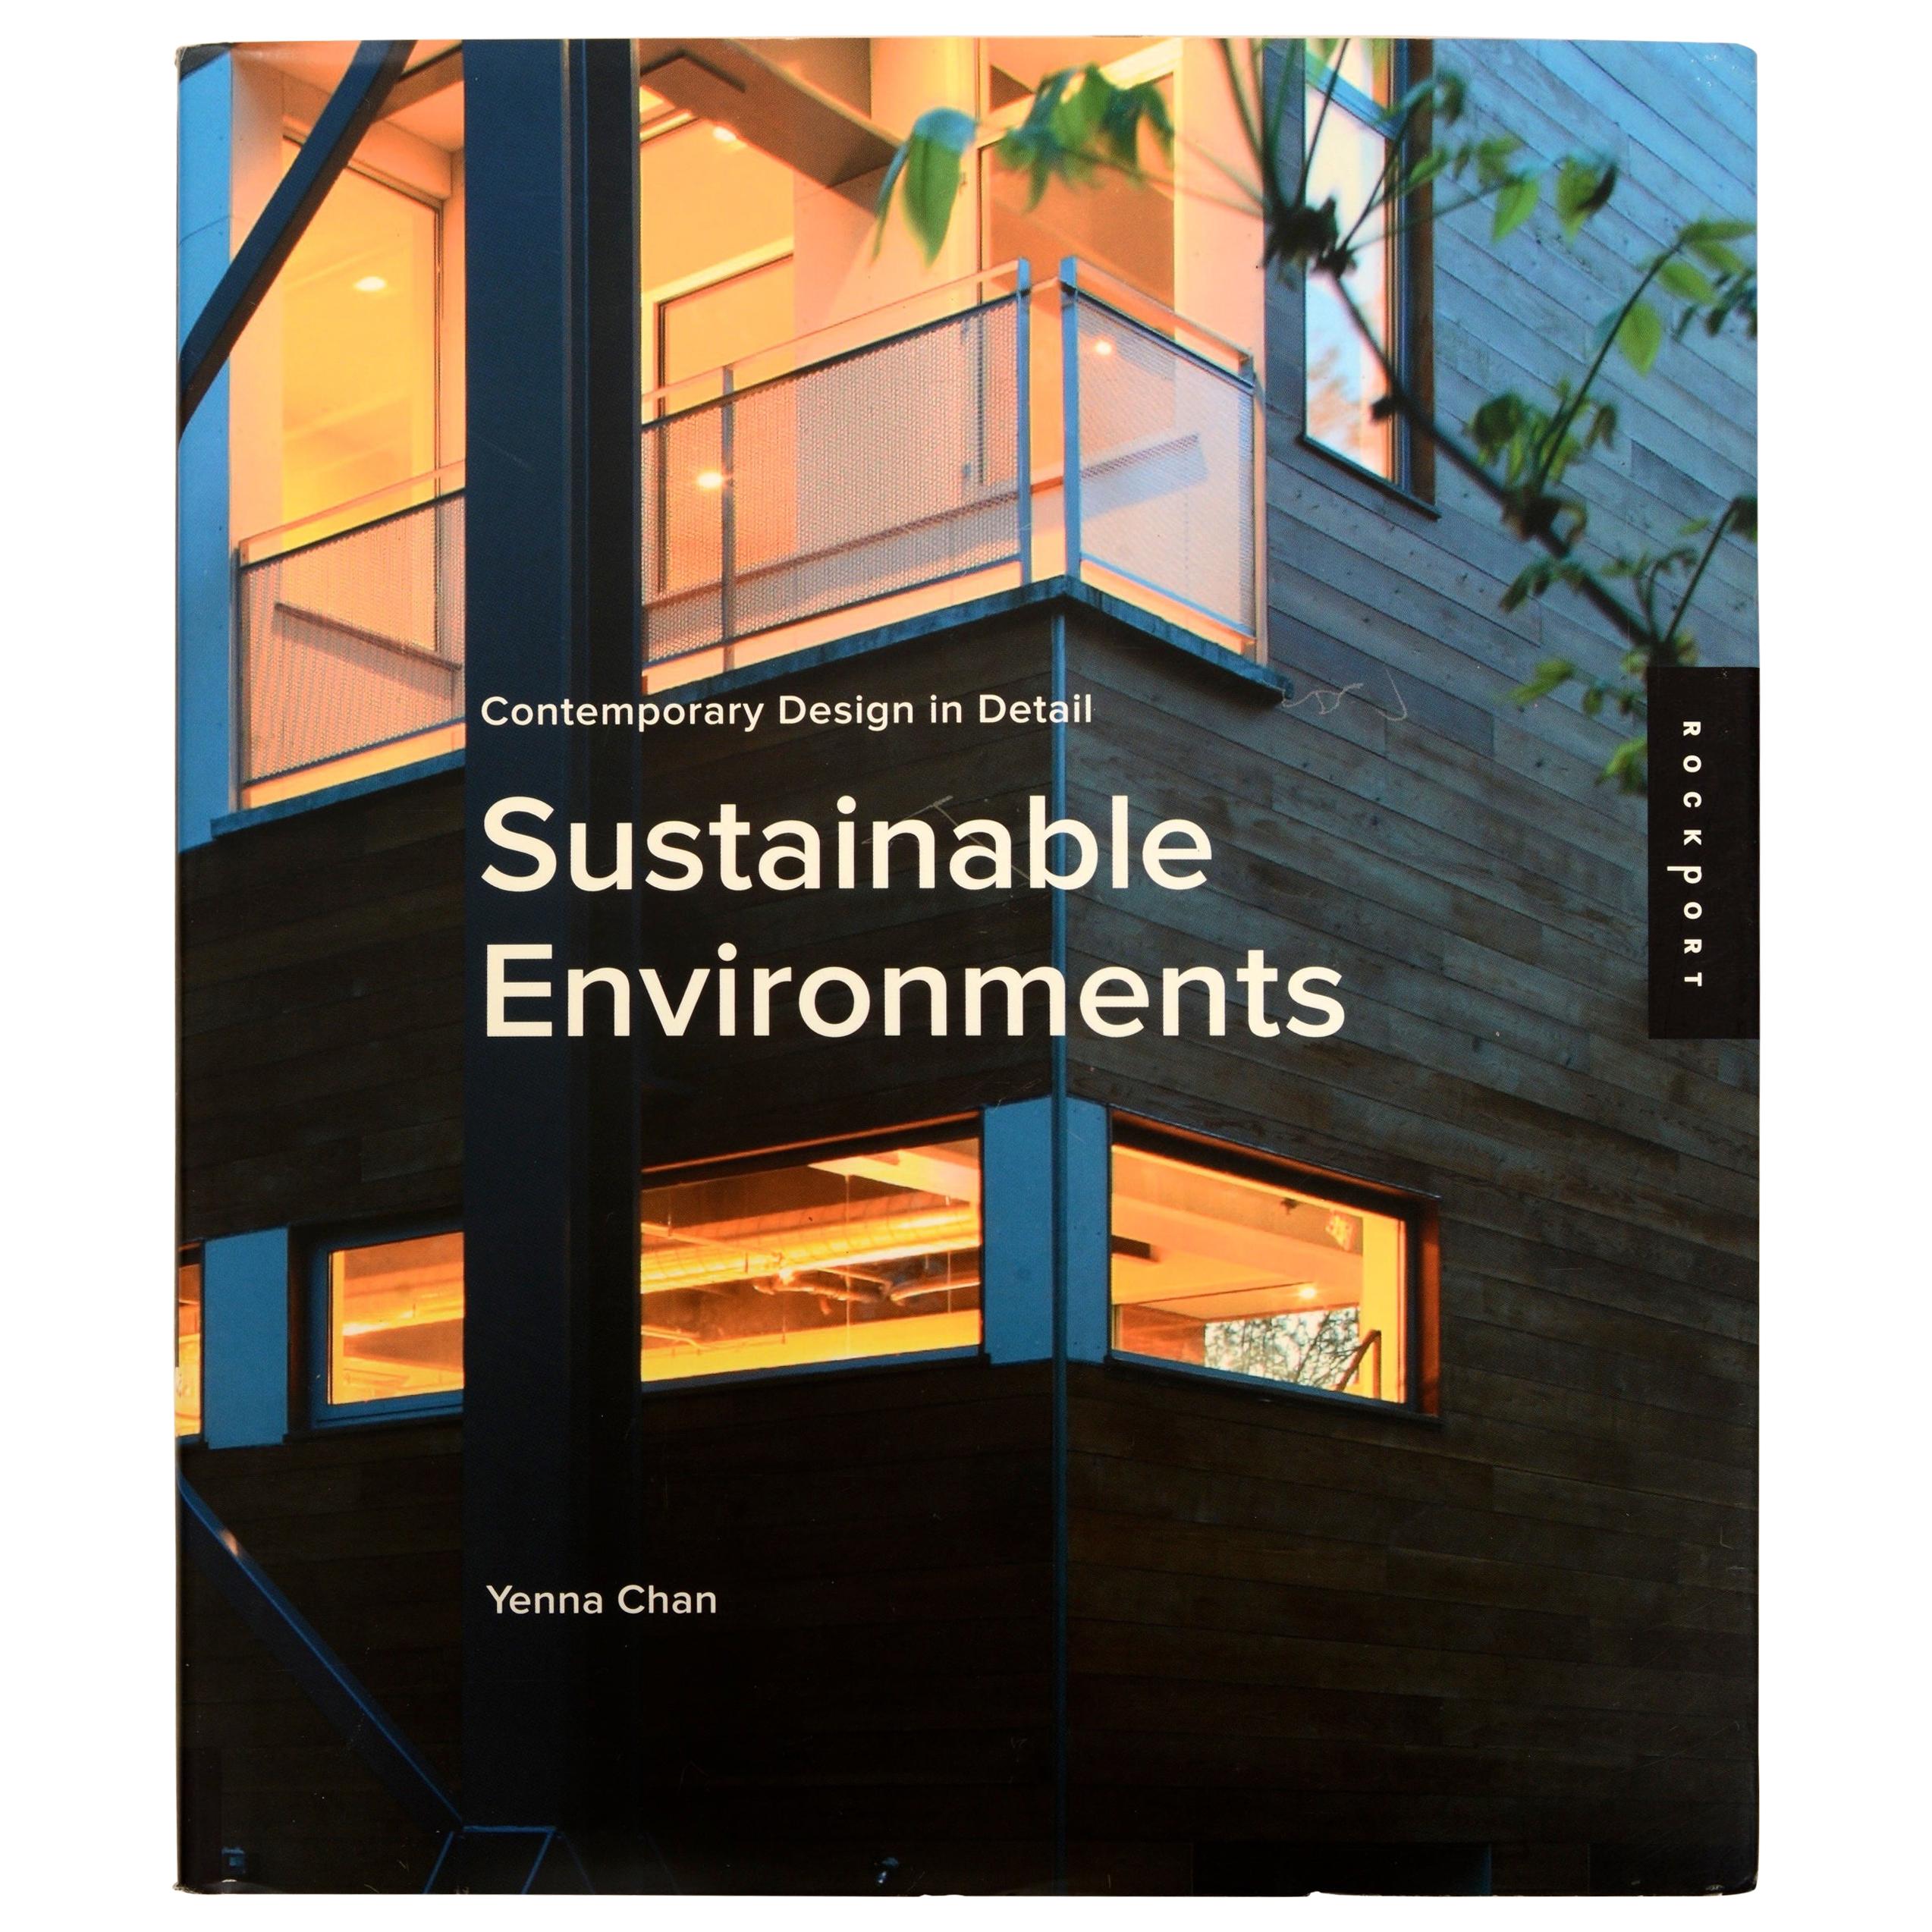 Sustainable Environments by Yenna Chan and Alicia Kennedy, First Edition